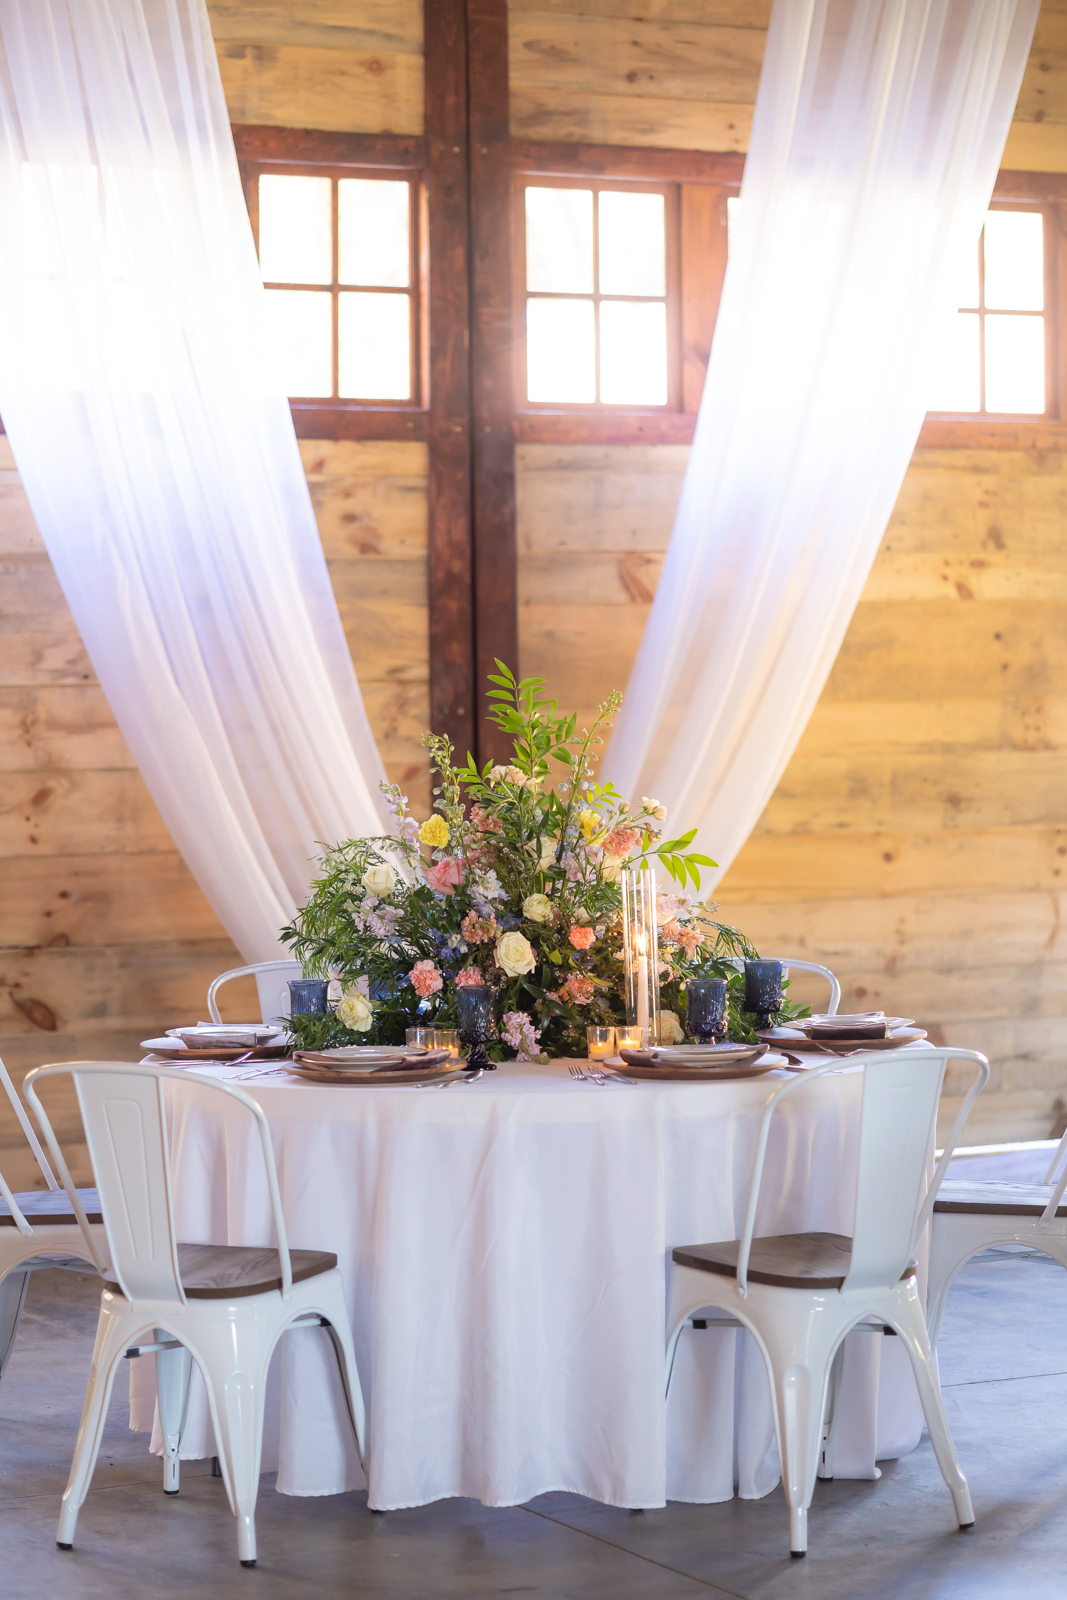 Whimsical Pastel Floral Centerpiece